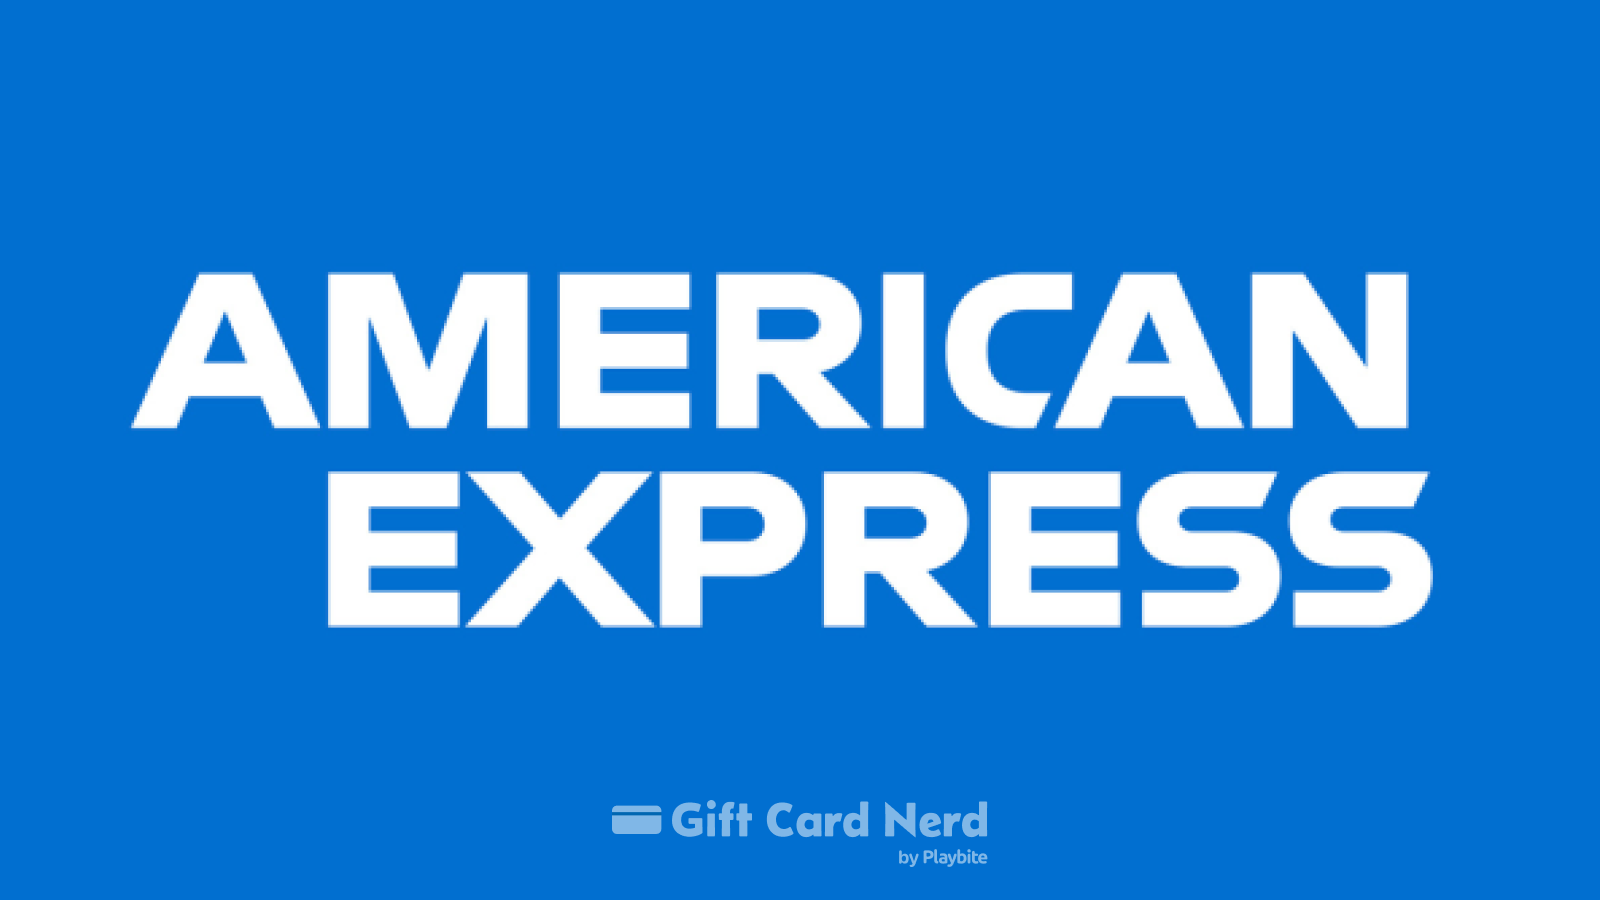 Can I Use an Amex Gift Card on Venmo?